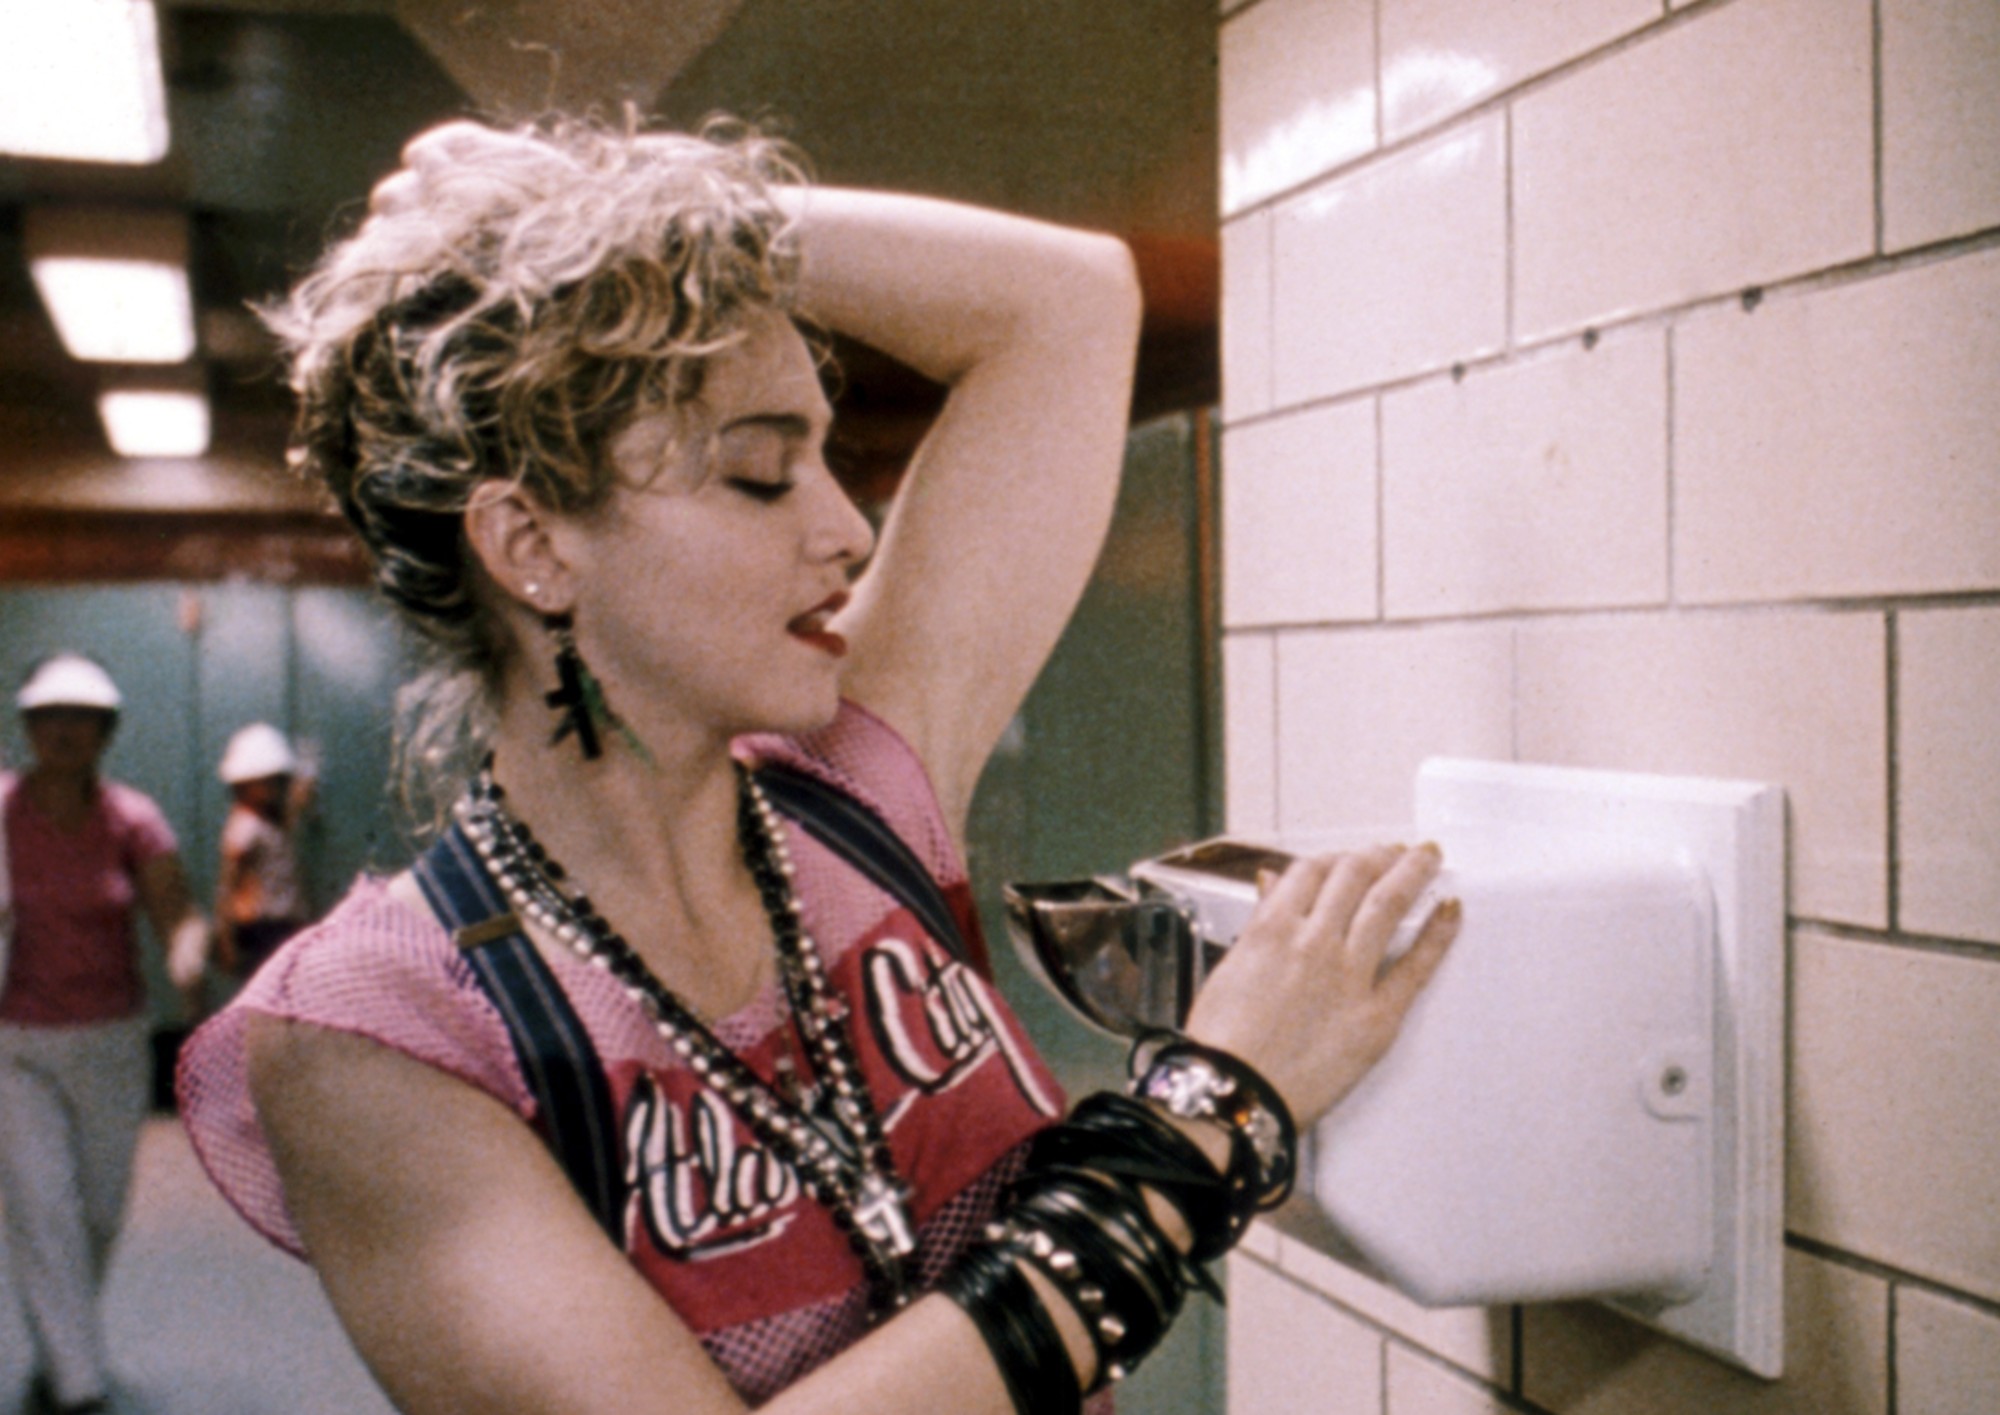 Image from the motion picture Desperately Seeking Susan